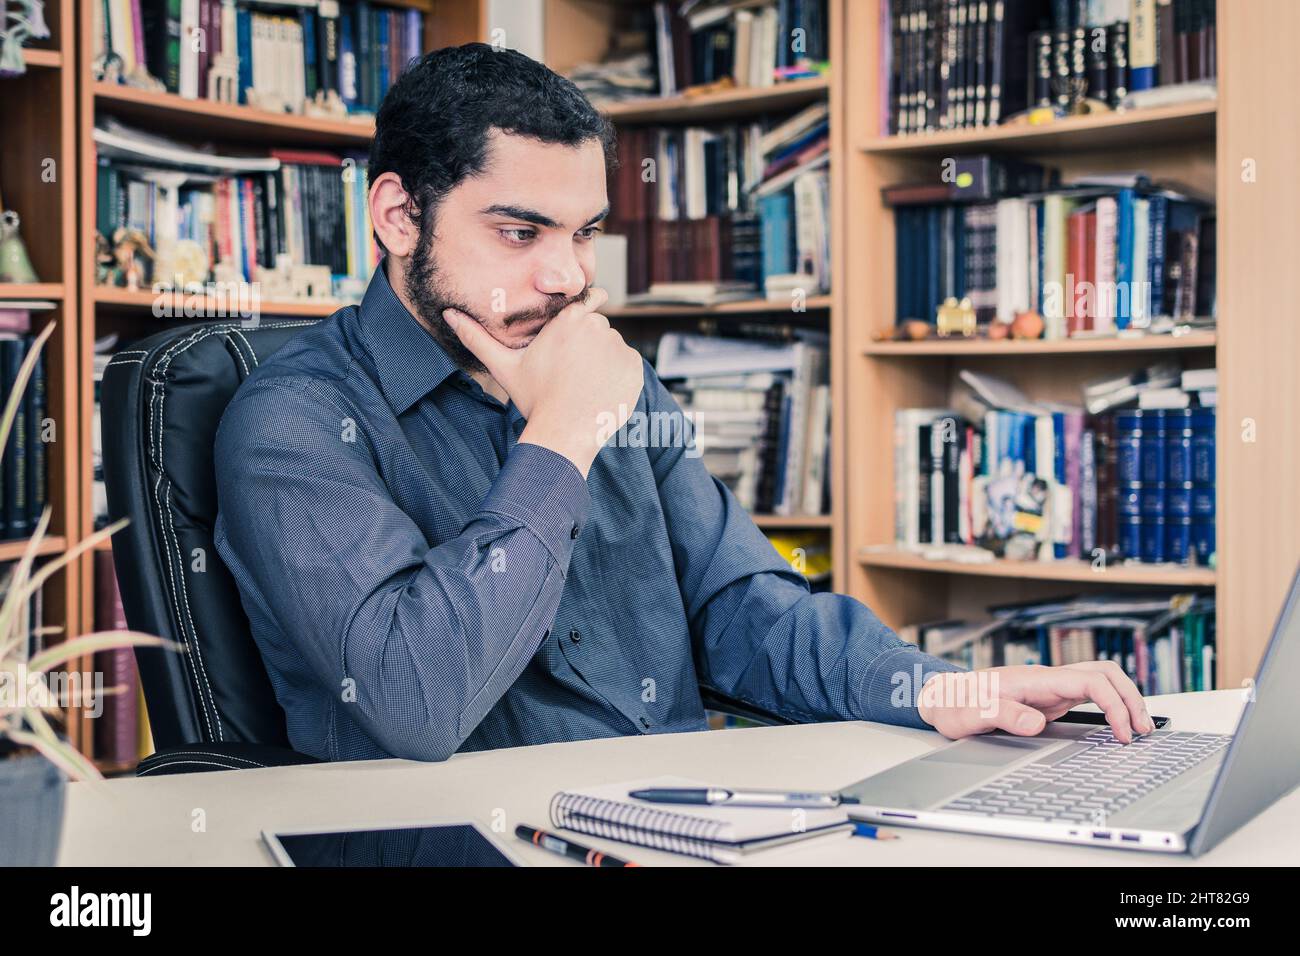 A young entrepreneur working with a laptop on his desk from home with piles of books on shelves on the background Stock Photo